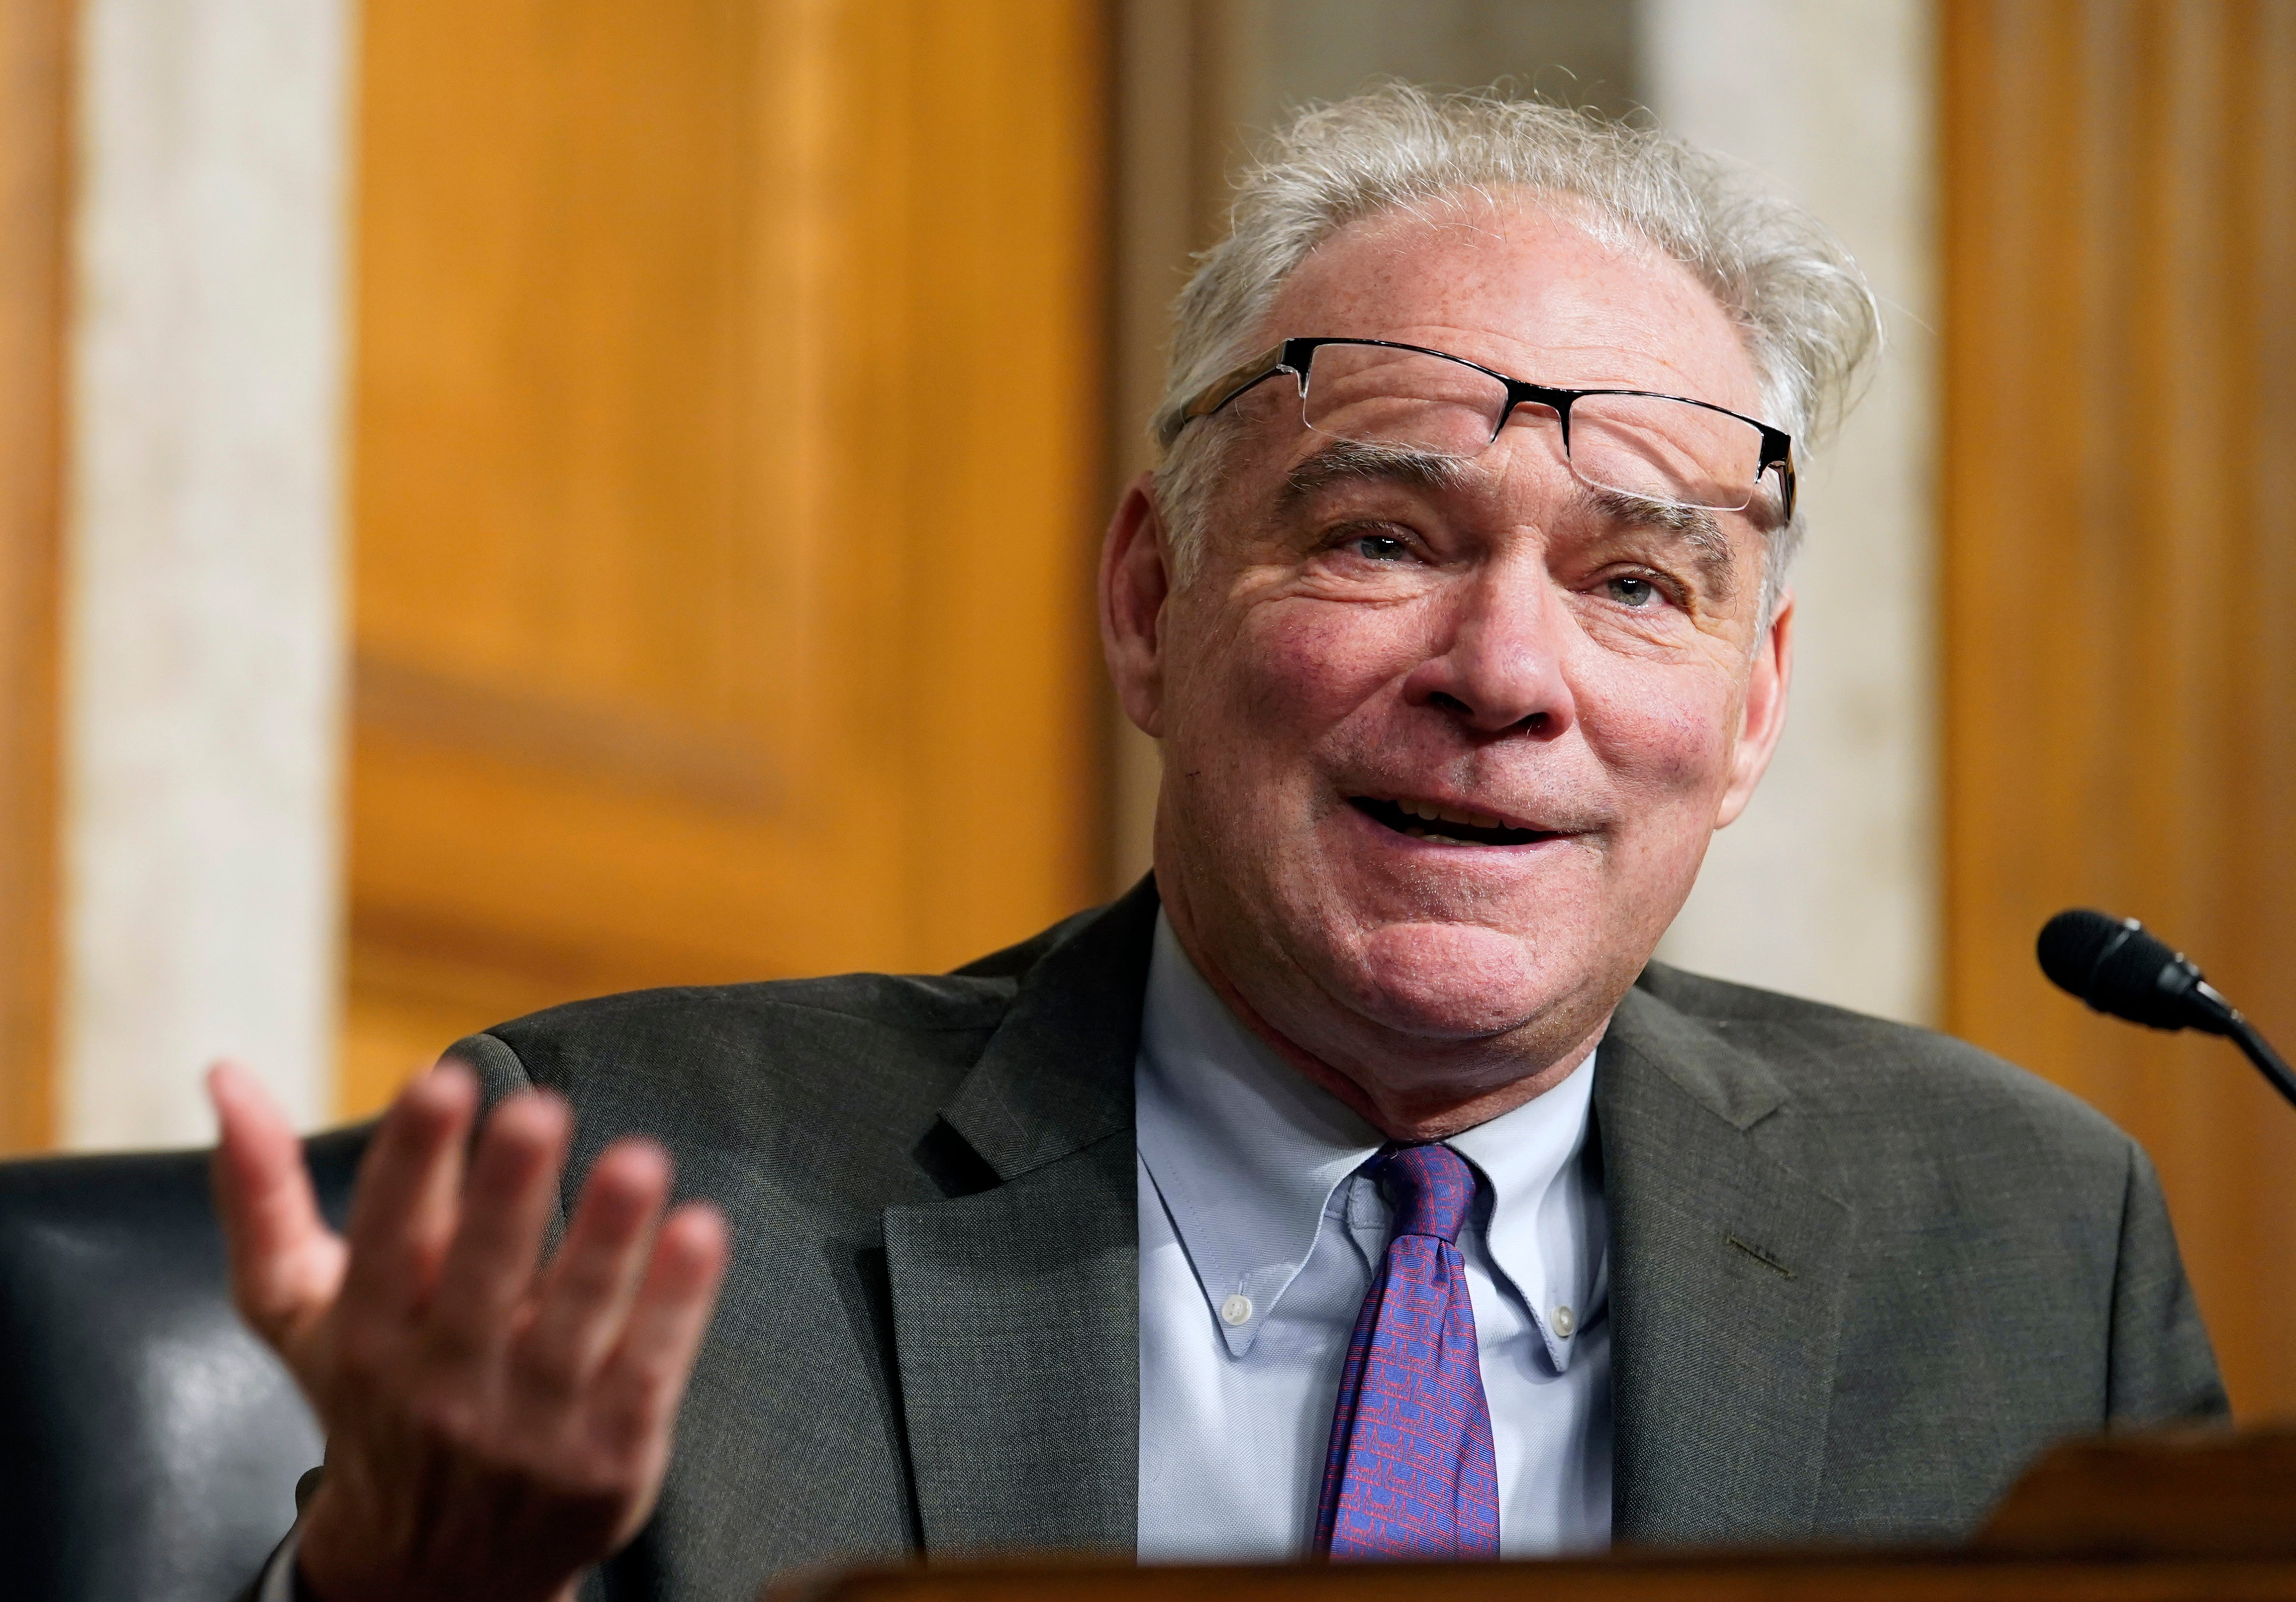 Sen. Tim Kaine to address media amid reelection speculation The